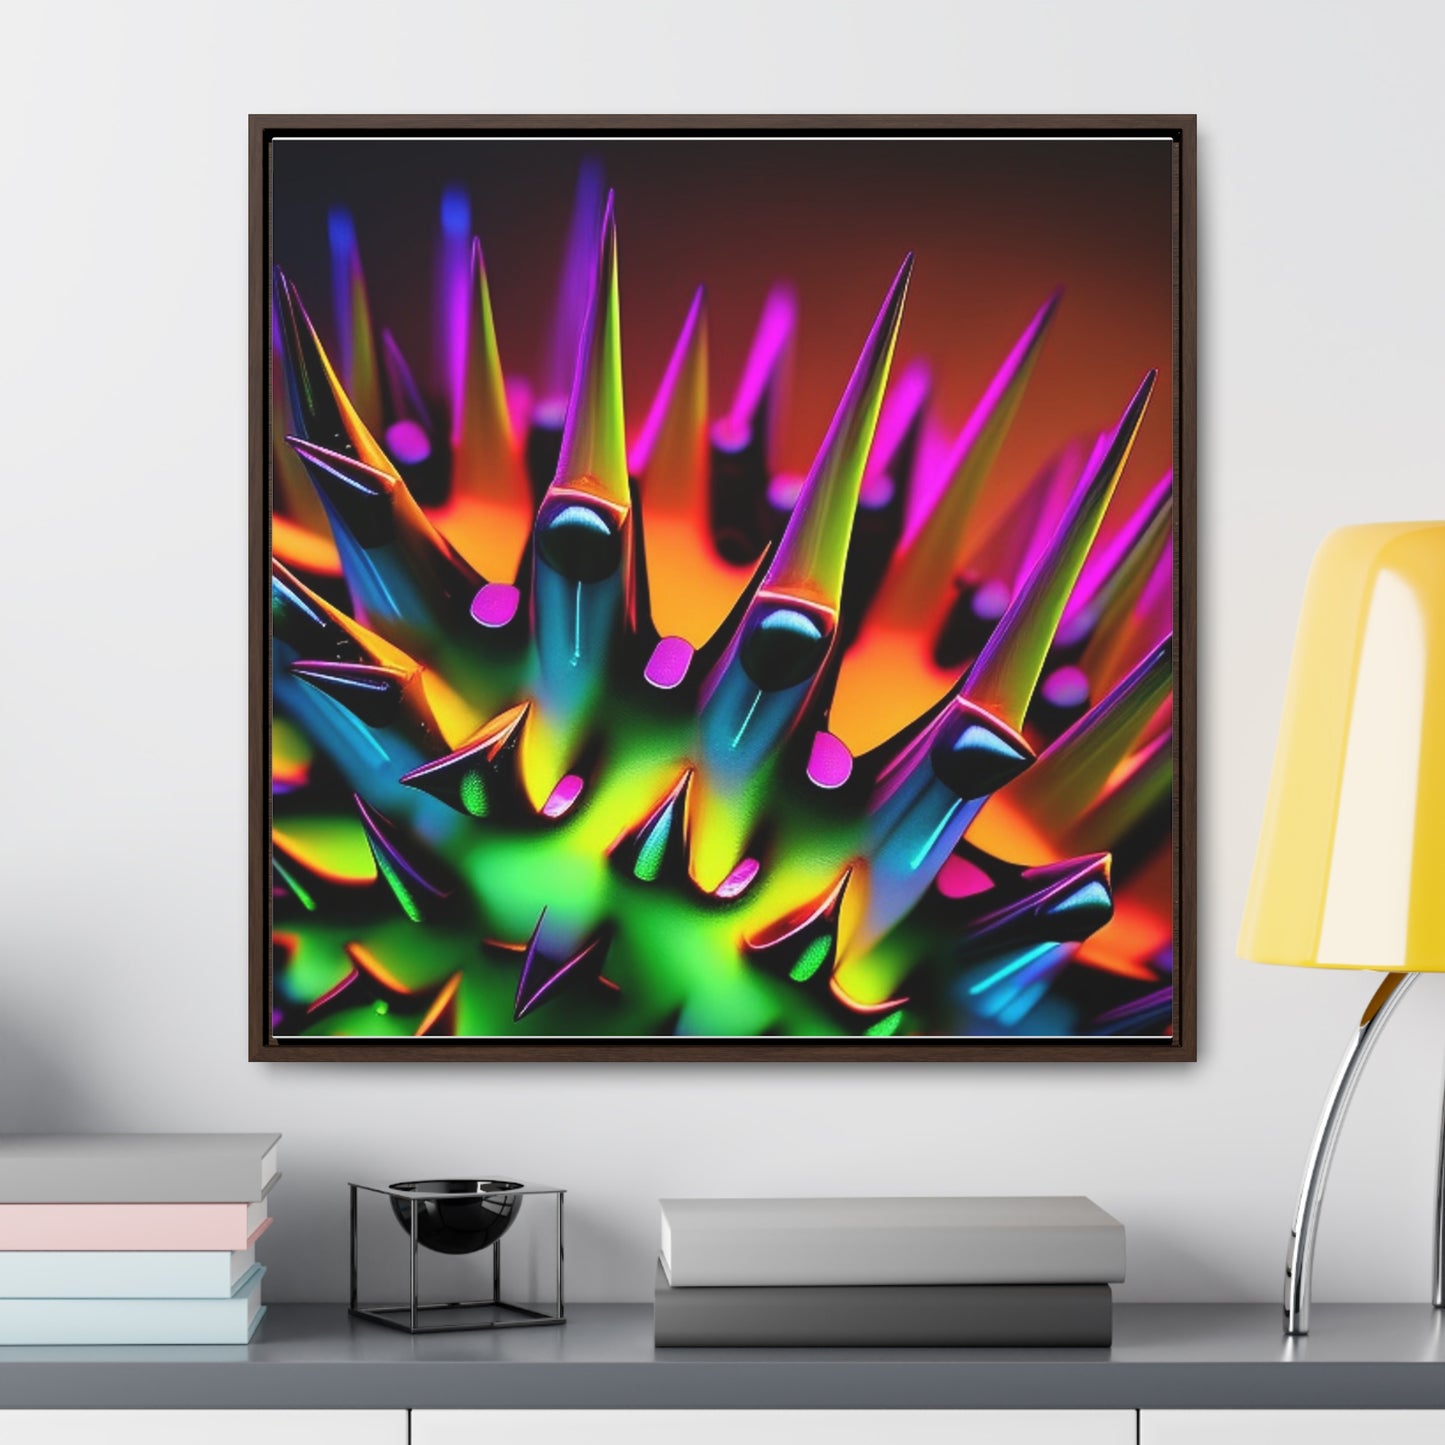 Gallery Canvas Wraps, Square Frame Macro Neon Spike 1